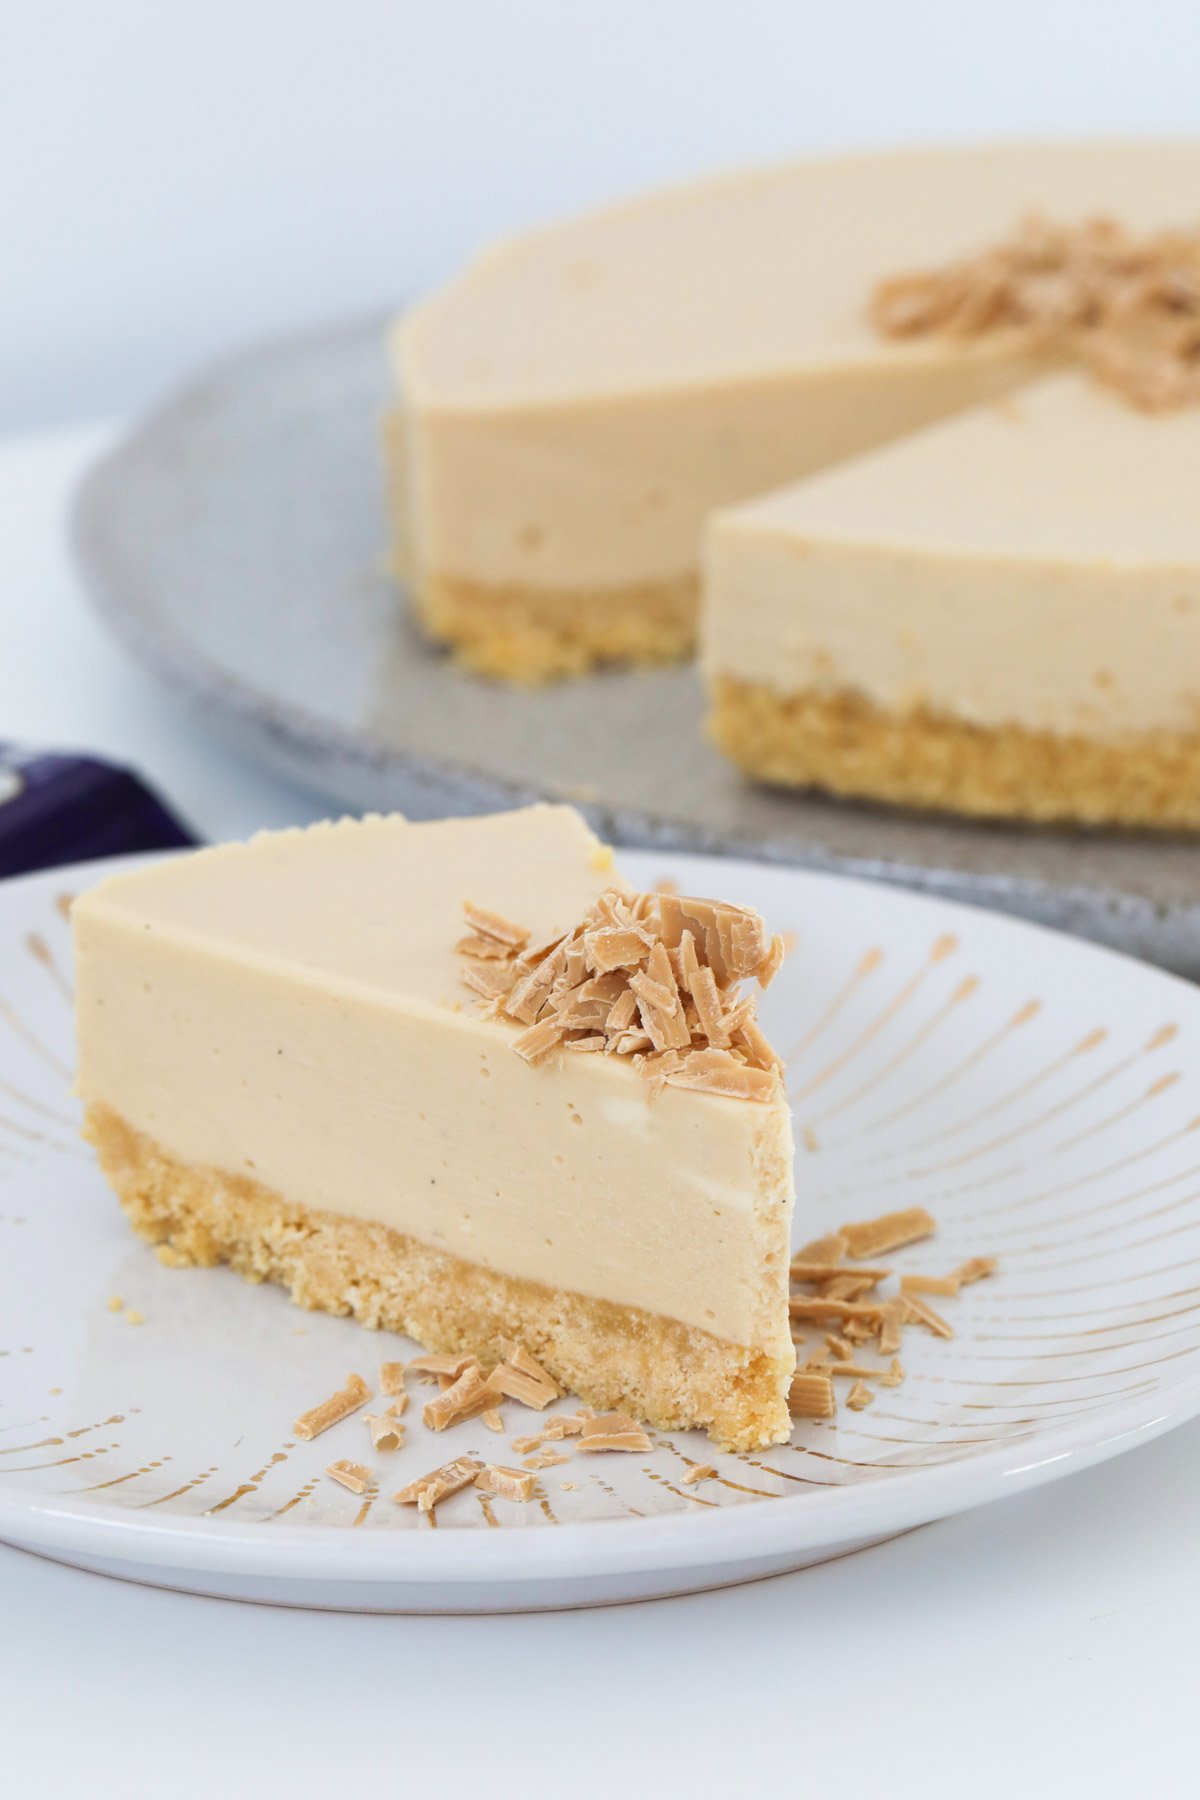 A slice of white chocolate and caramel cheesecake served on a plate.